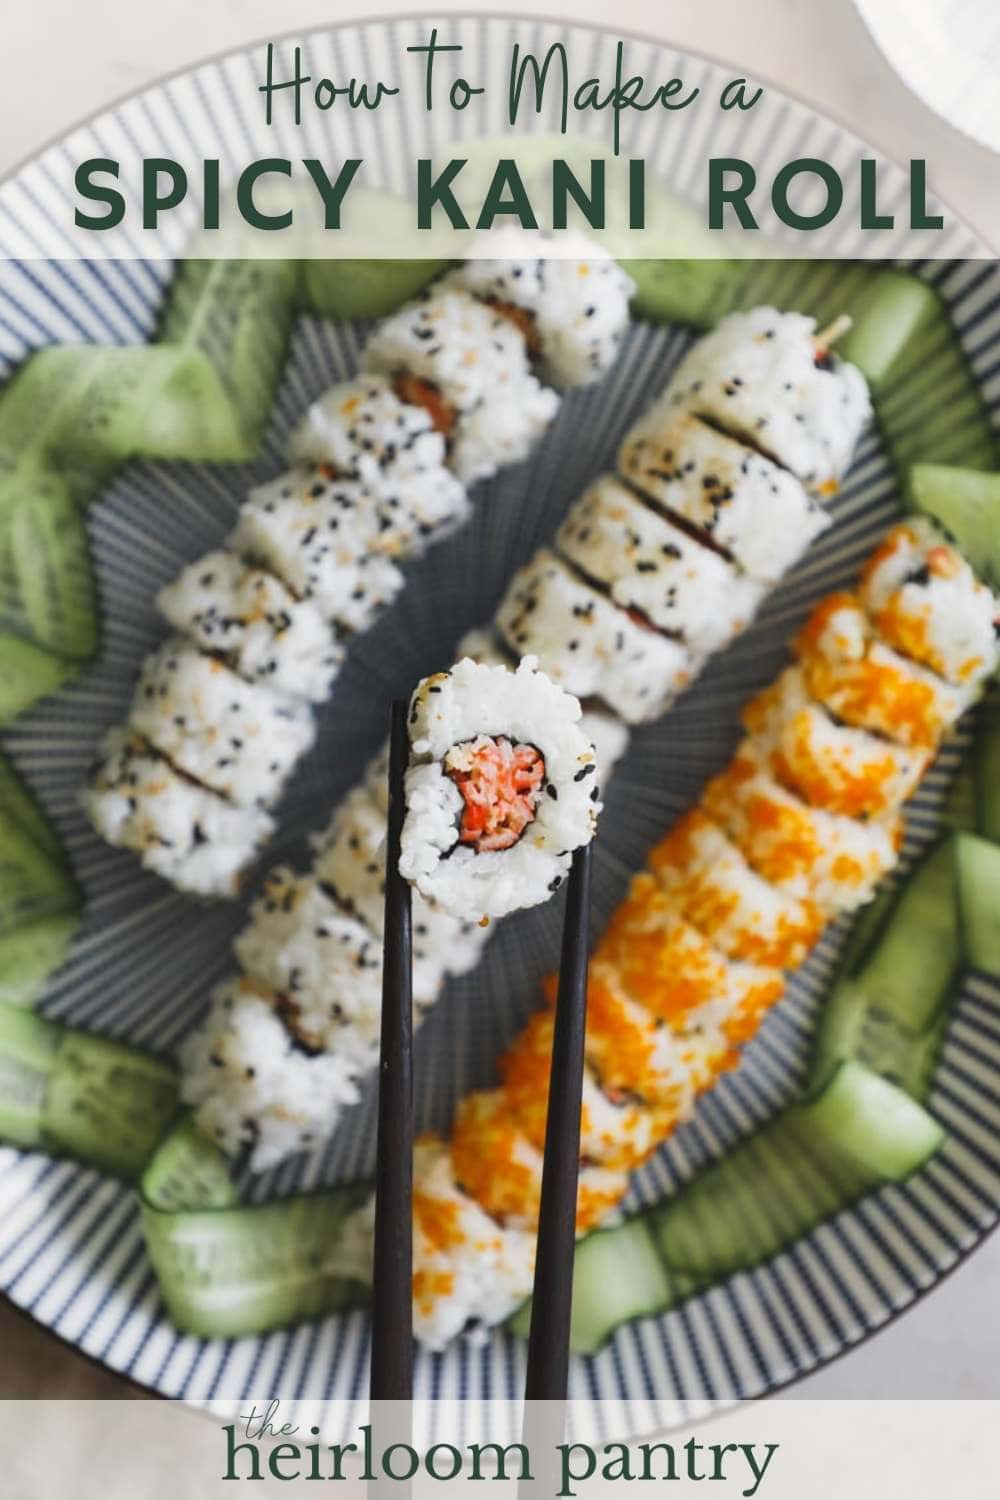 How to make a spicy kani roll Pinterest pin.